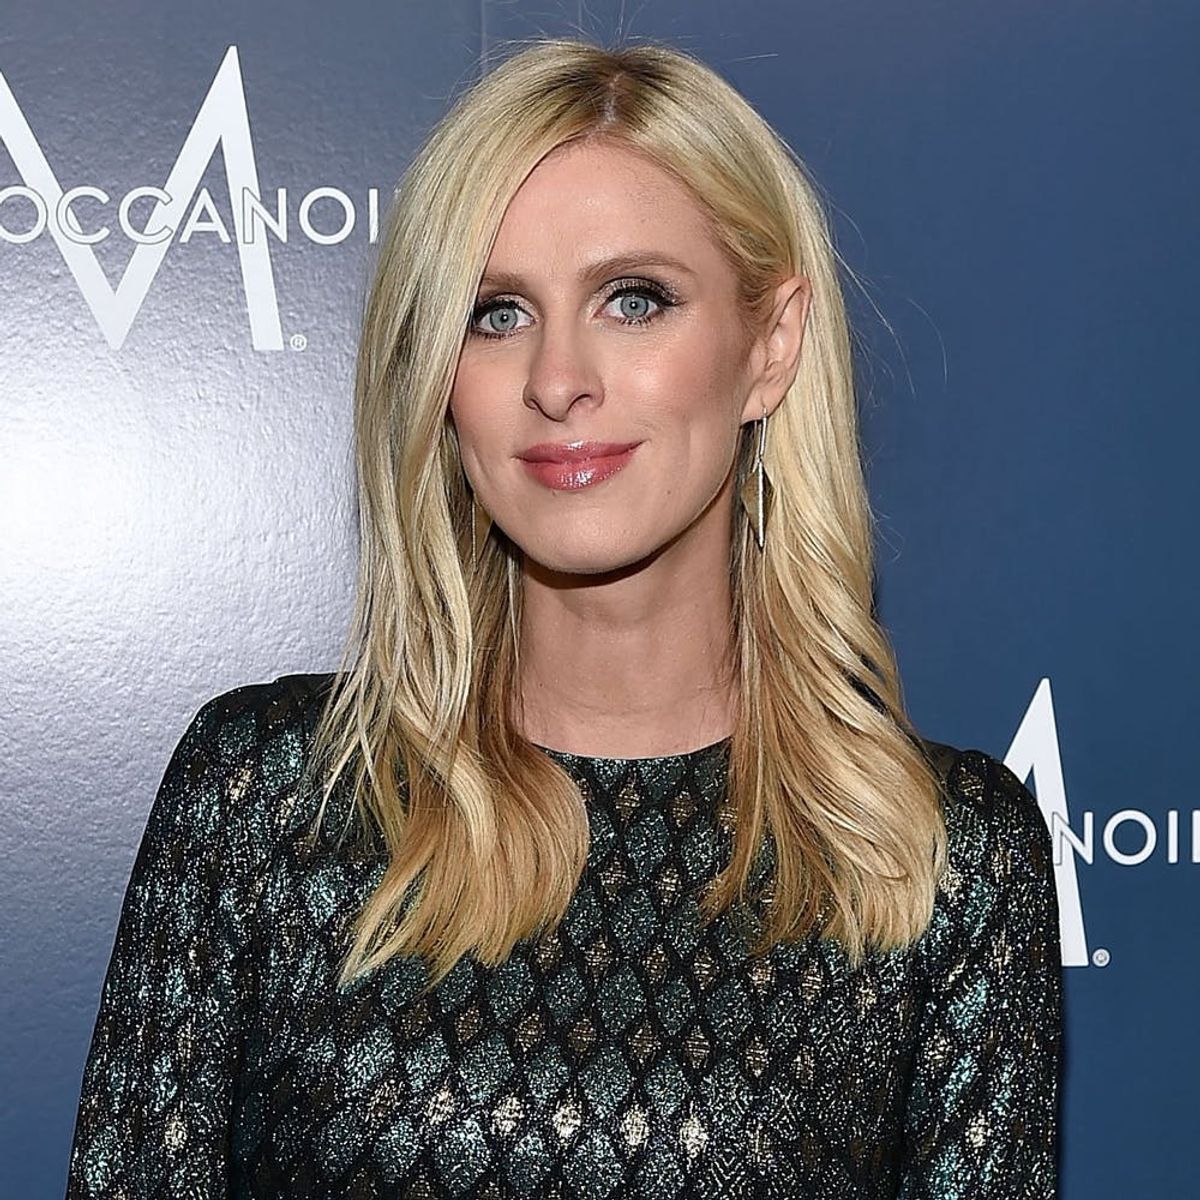 See the First Photo of Nicky Hilton Rothschild’s Baby Daughter Teddy